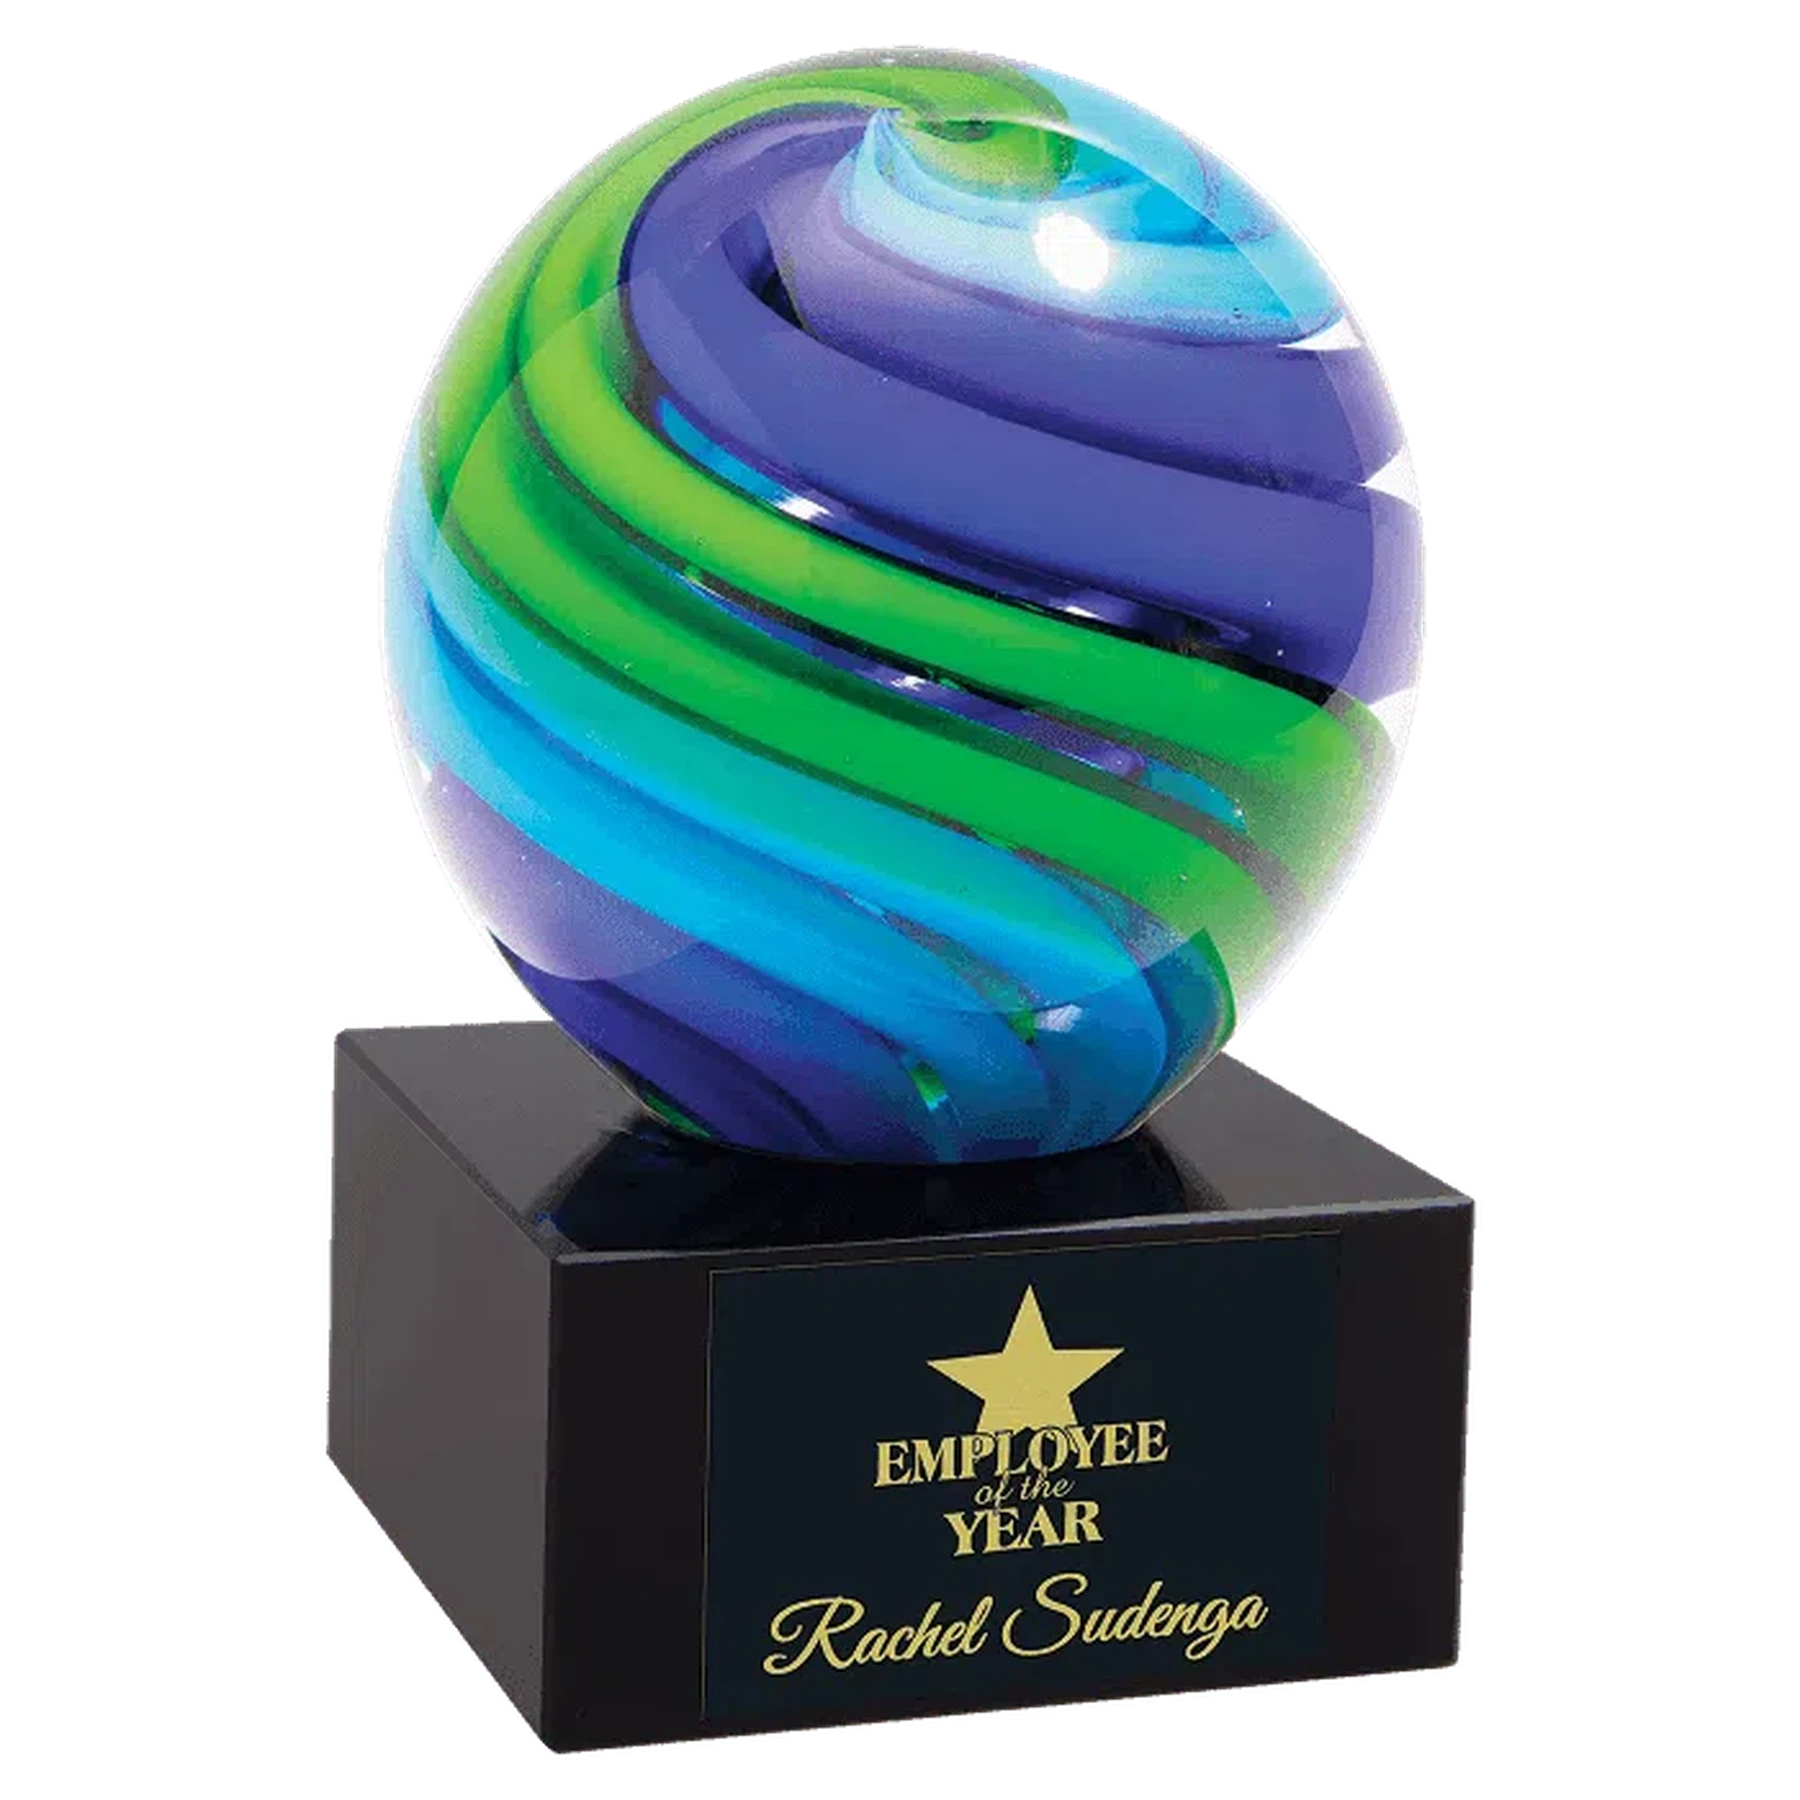 5" Green and Blue Two-Tone Sphere Art Glass Award